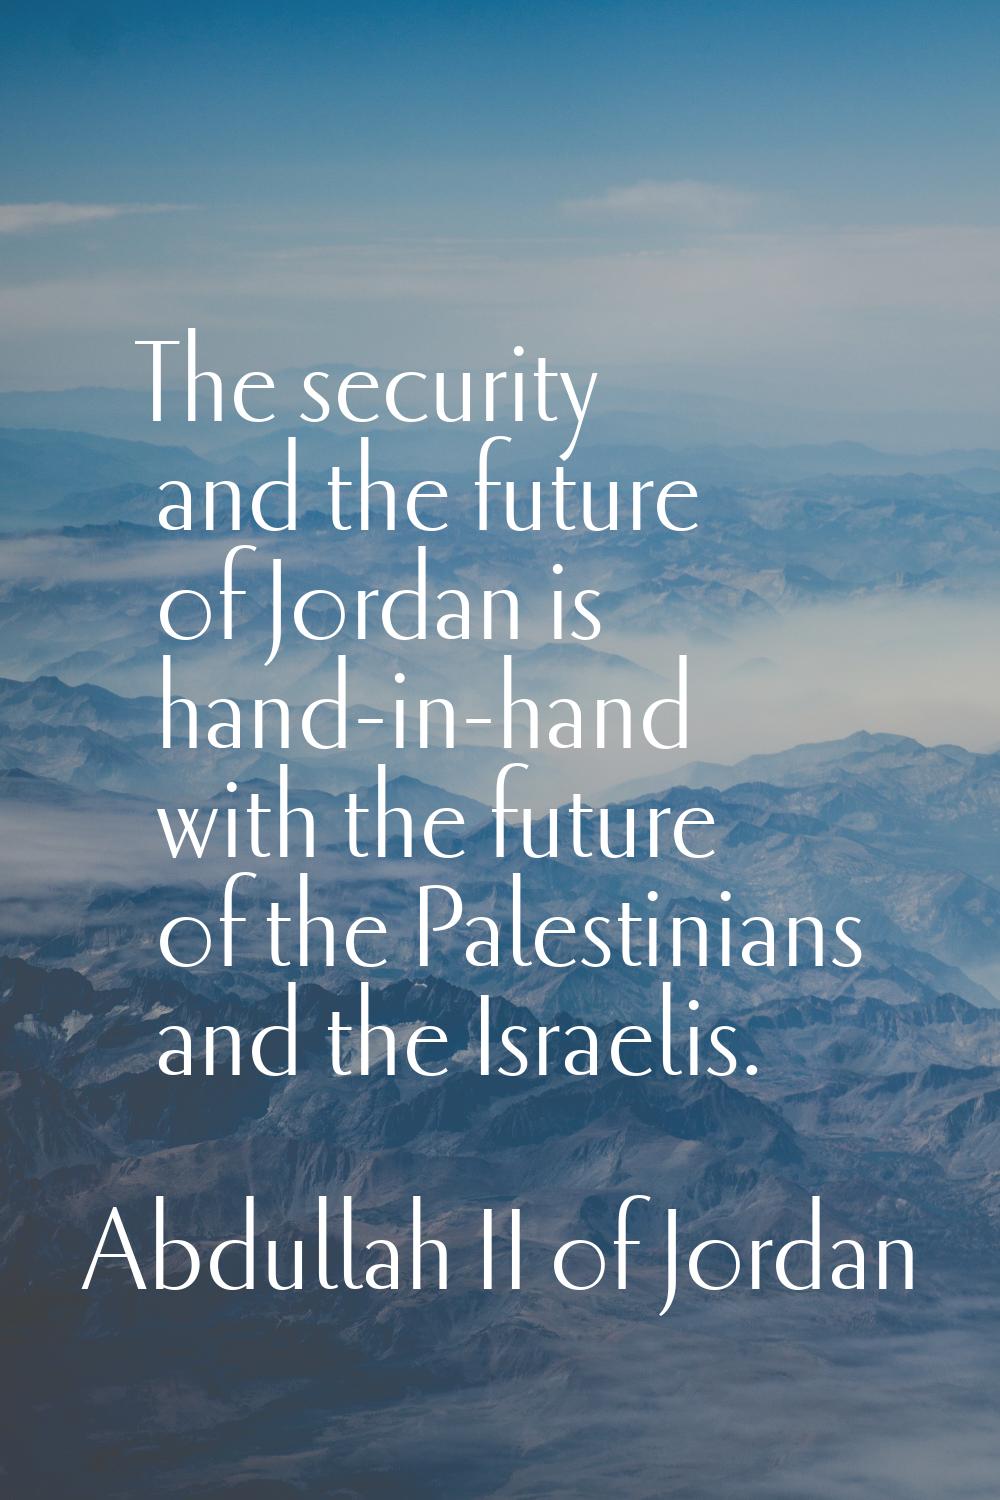 The security and the future of Jordan is hand-in-hand with the future of the Palestinians and the I